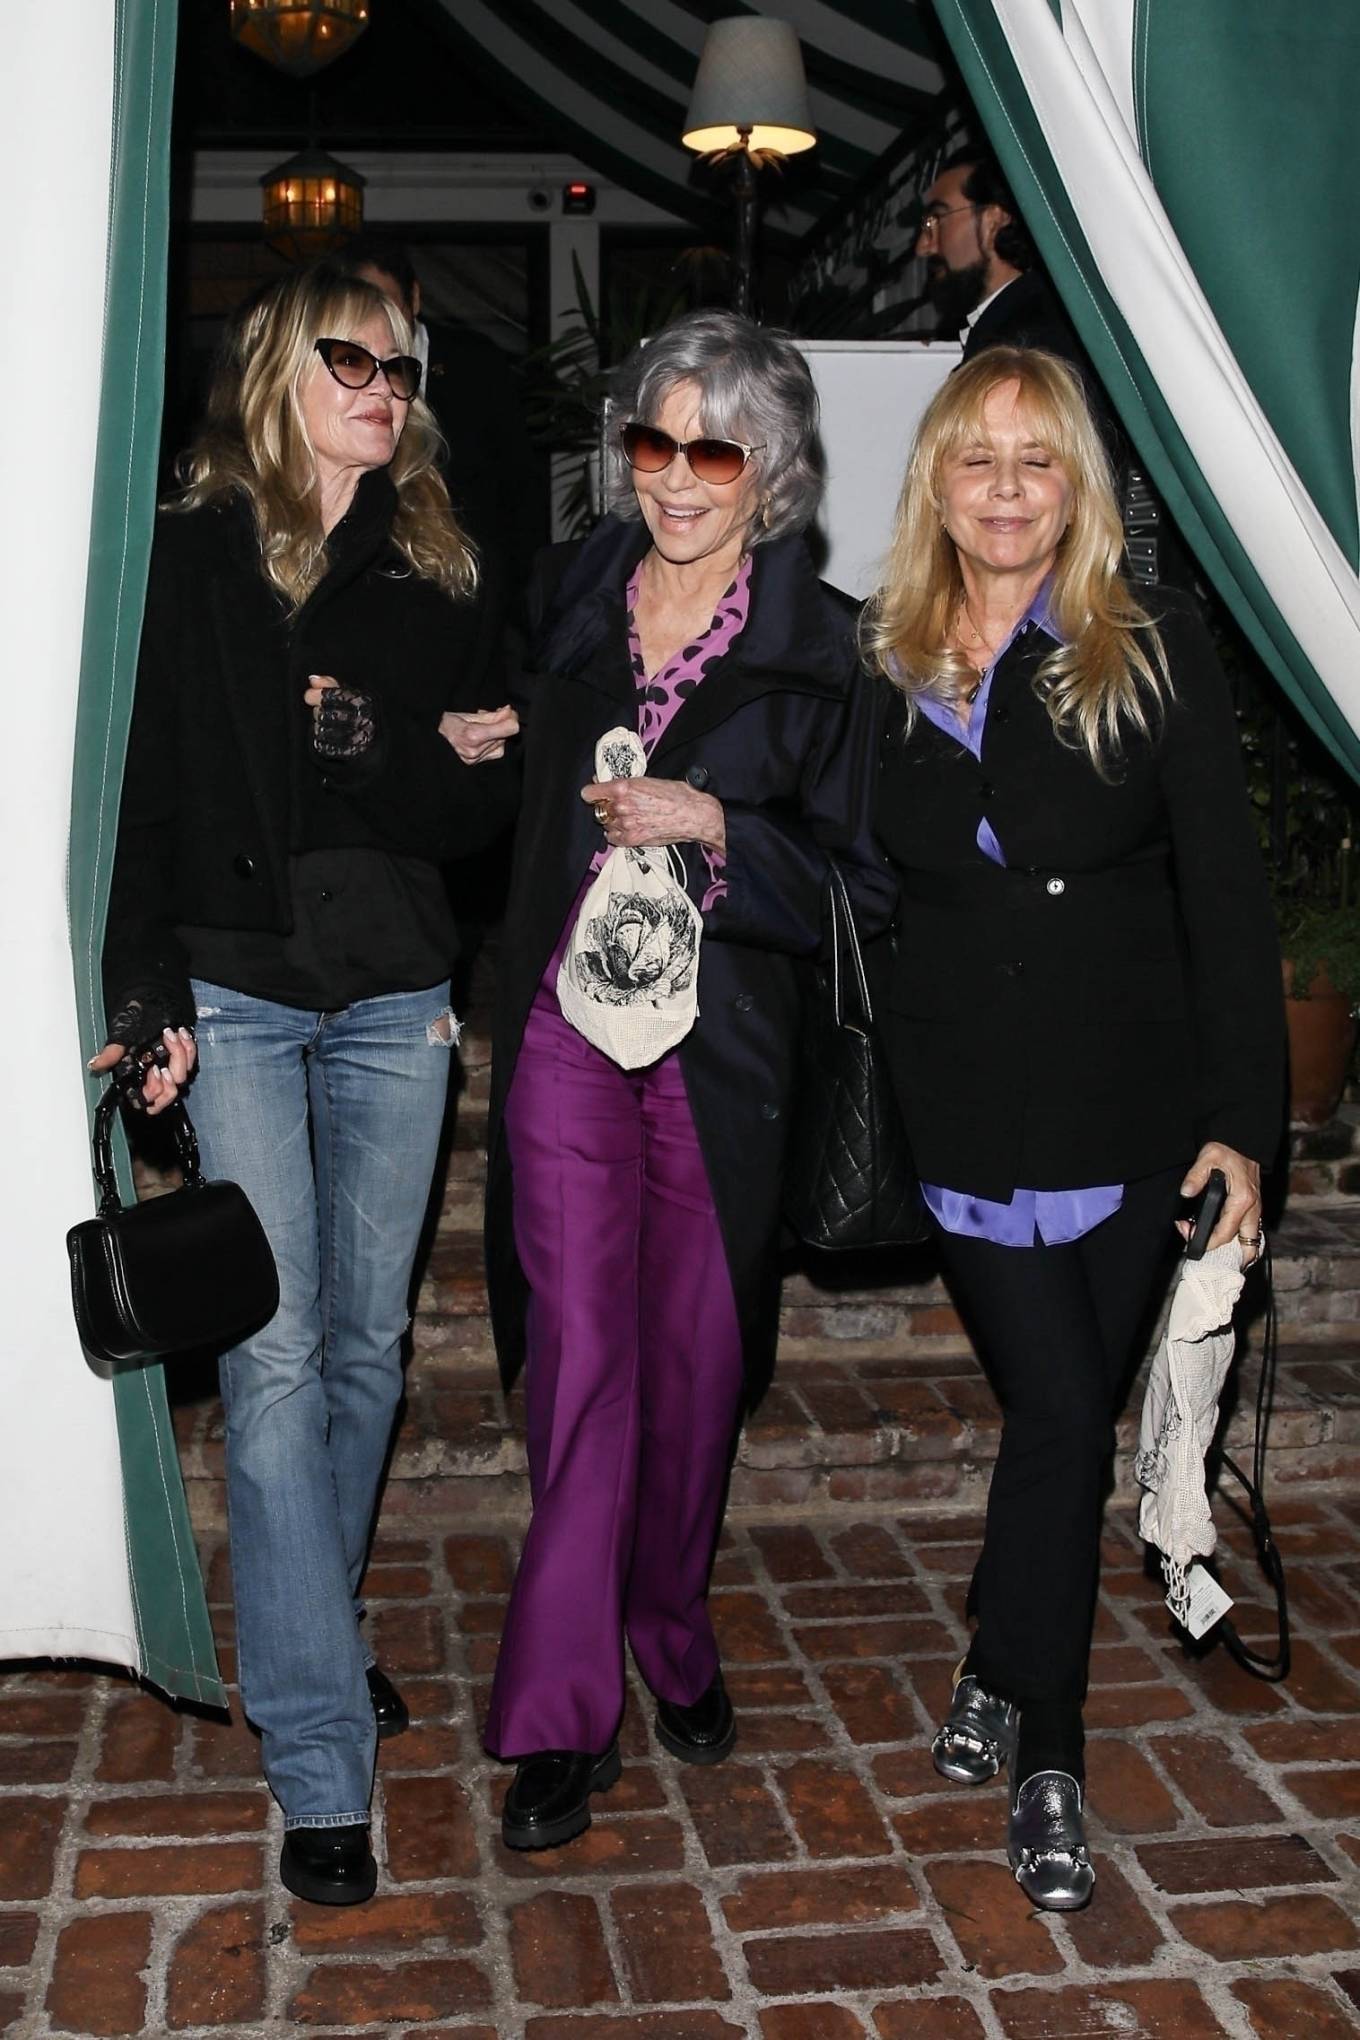 Melanie Griffith - With Rosanna Arquette and Jane Fonda on a night out in Hollywood